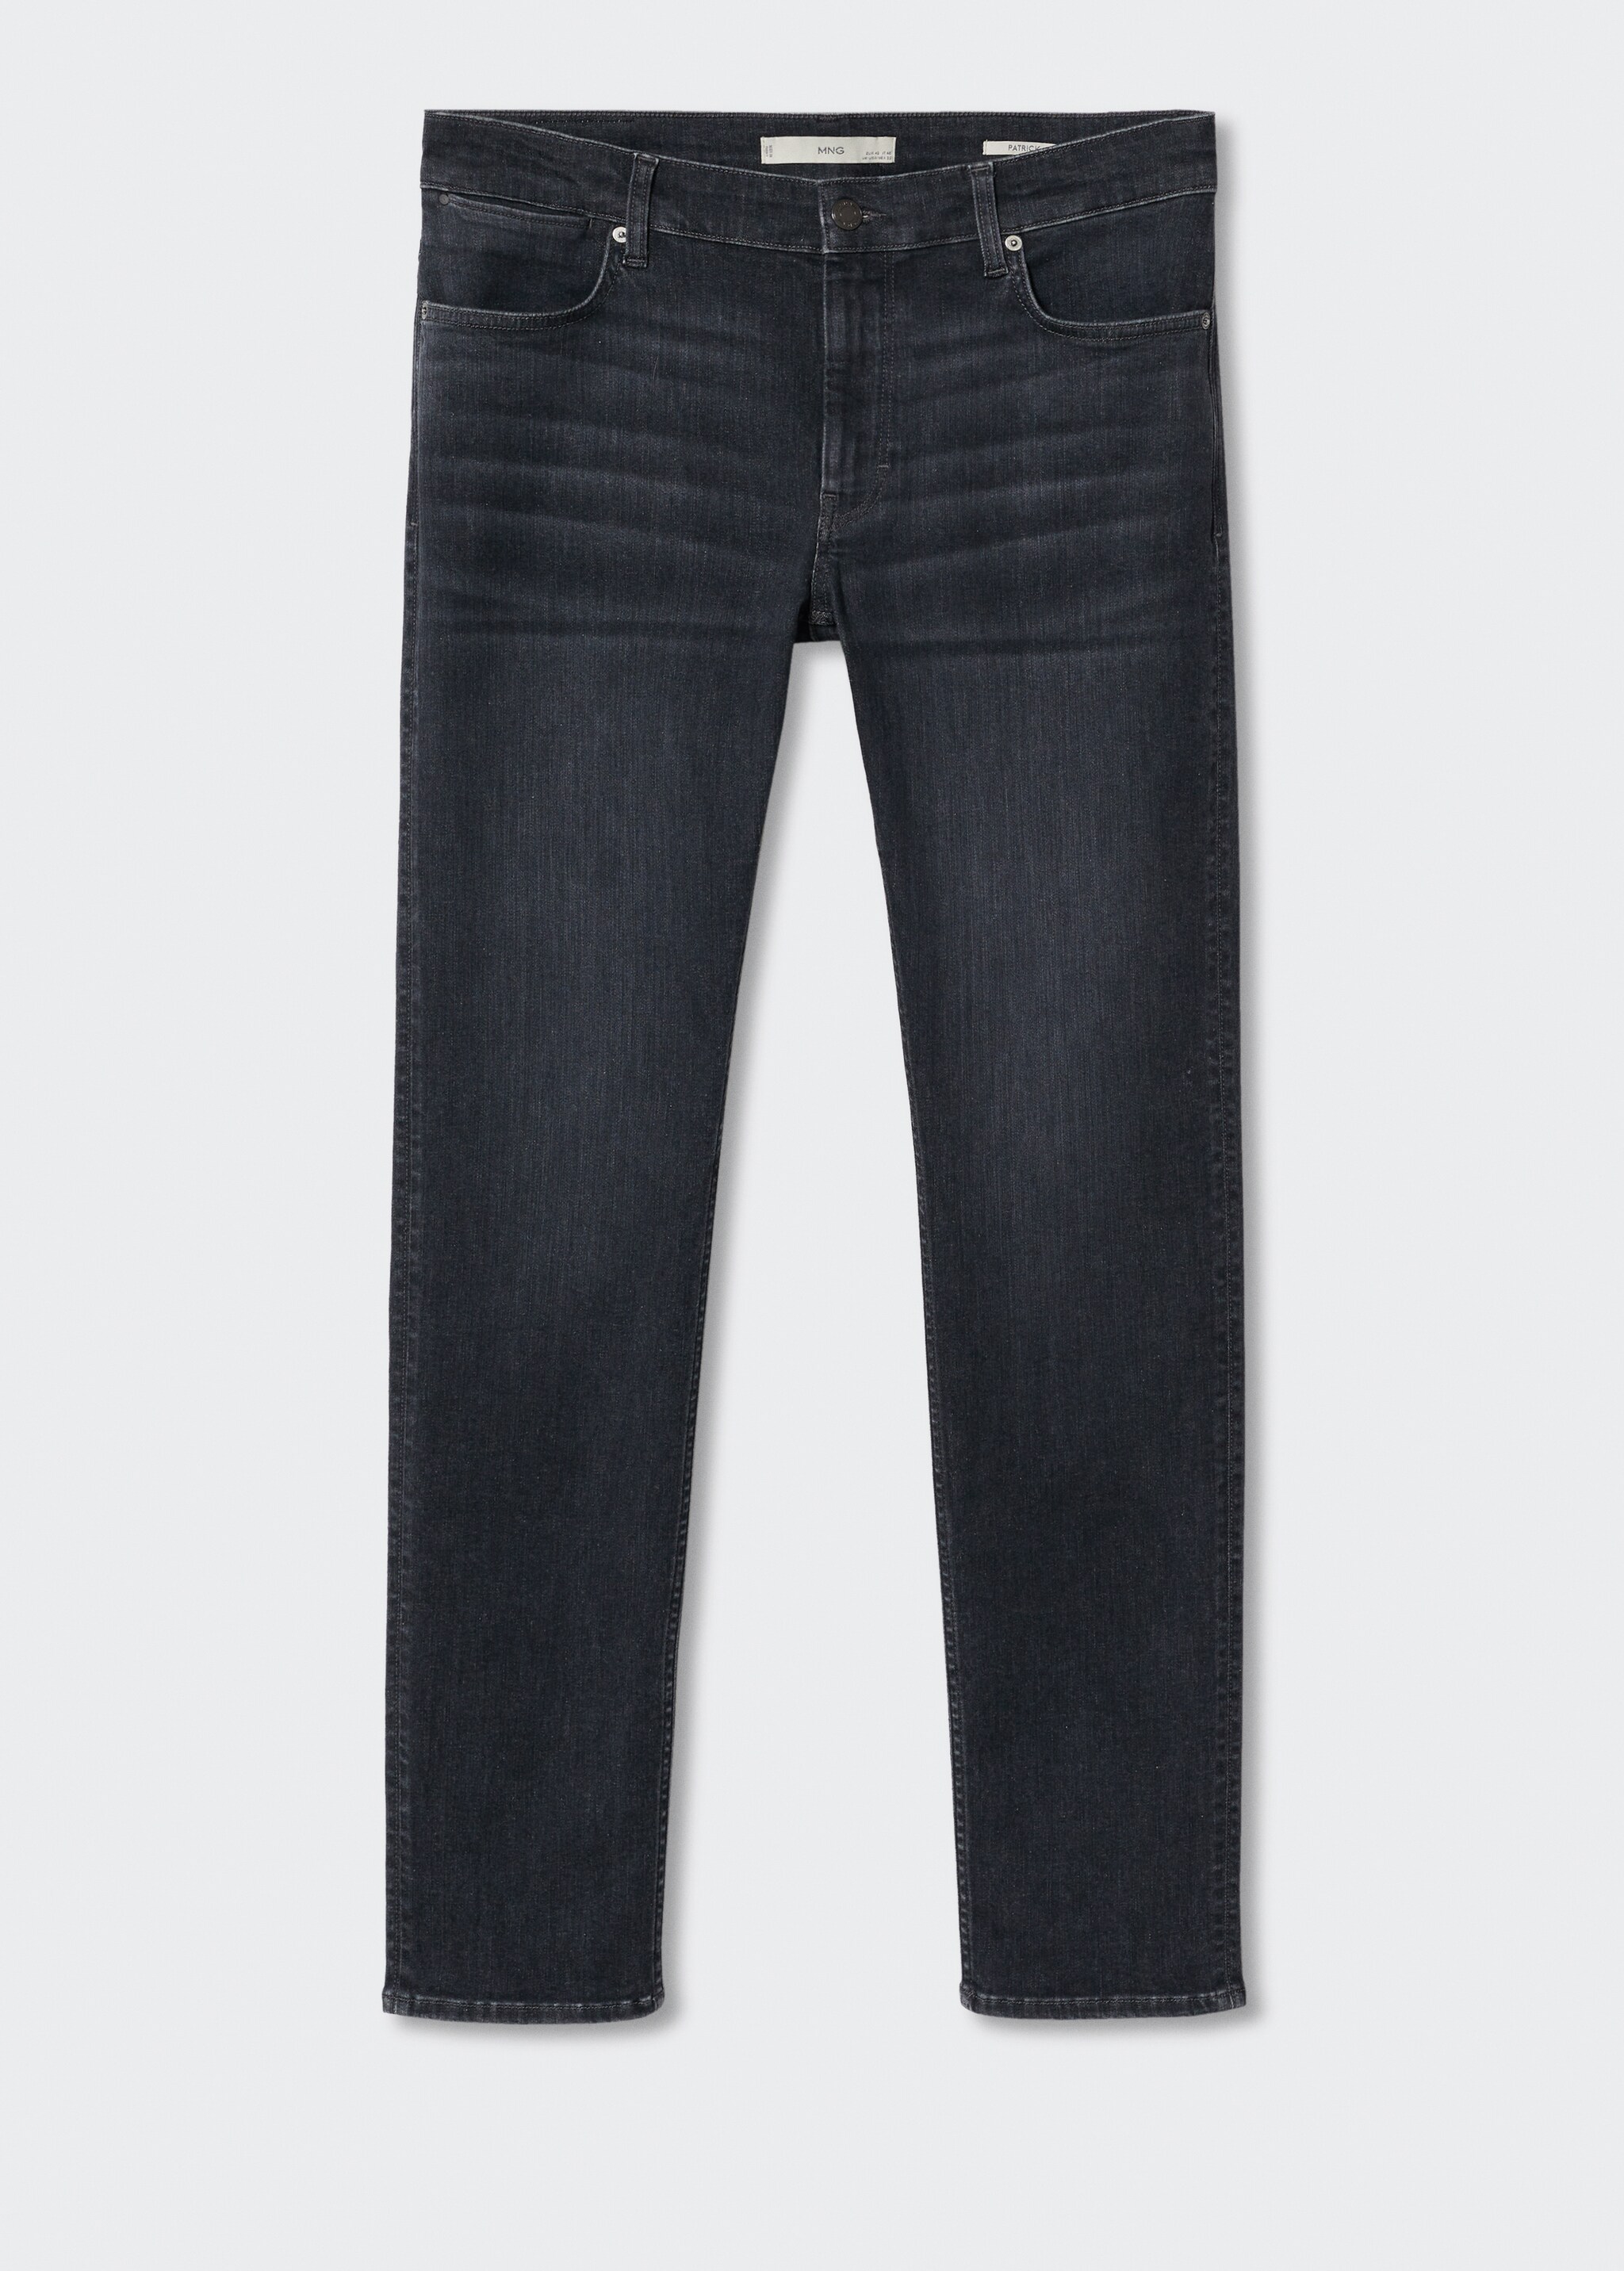 Slim fit Ultra Soft Touch Patrick jeans - Article without model